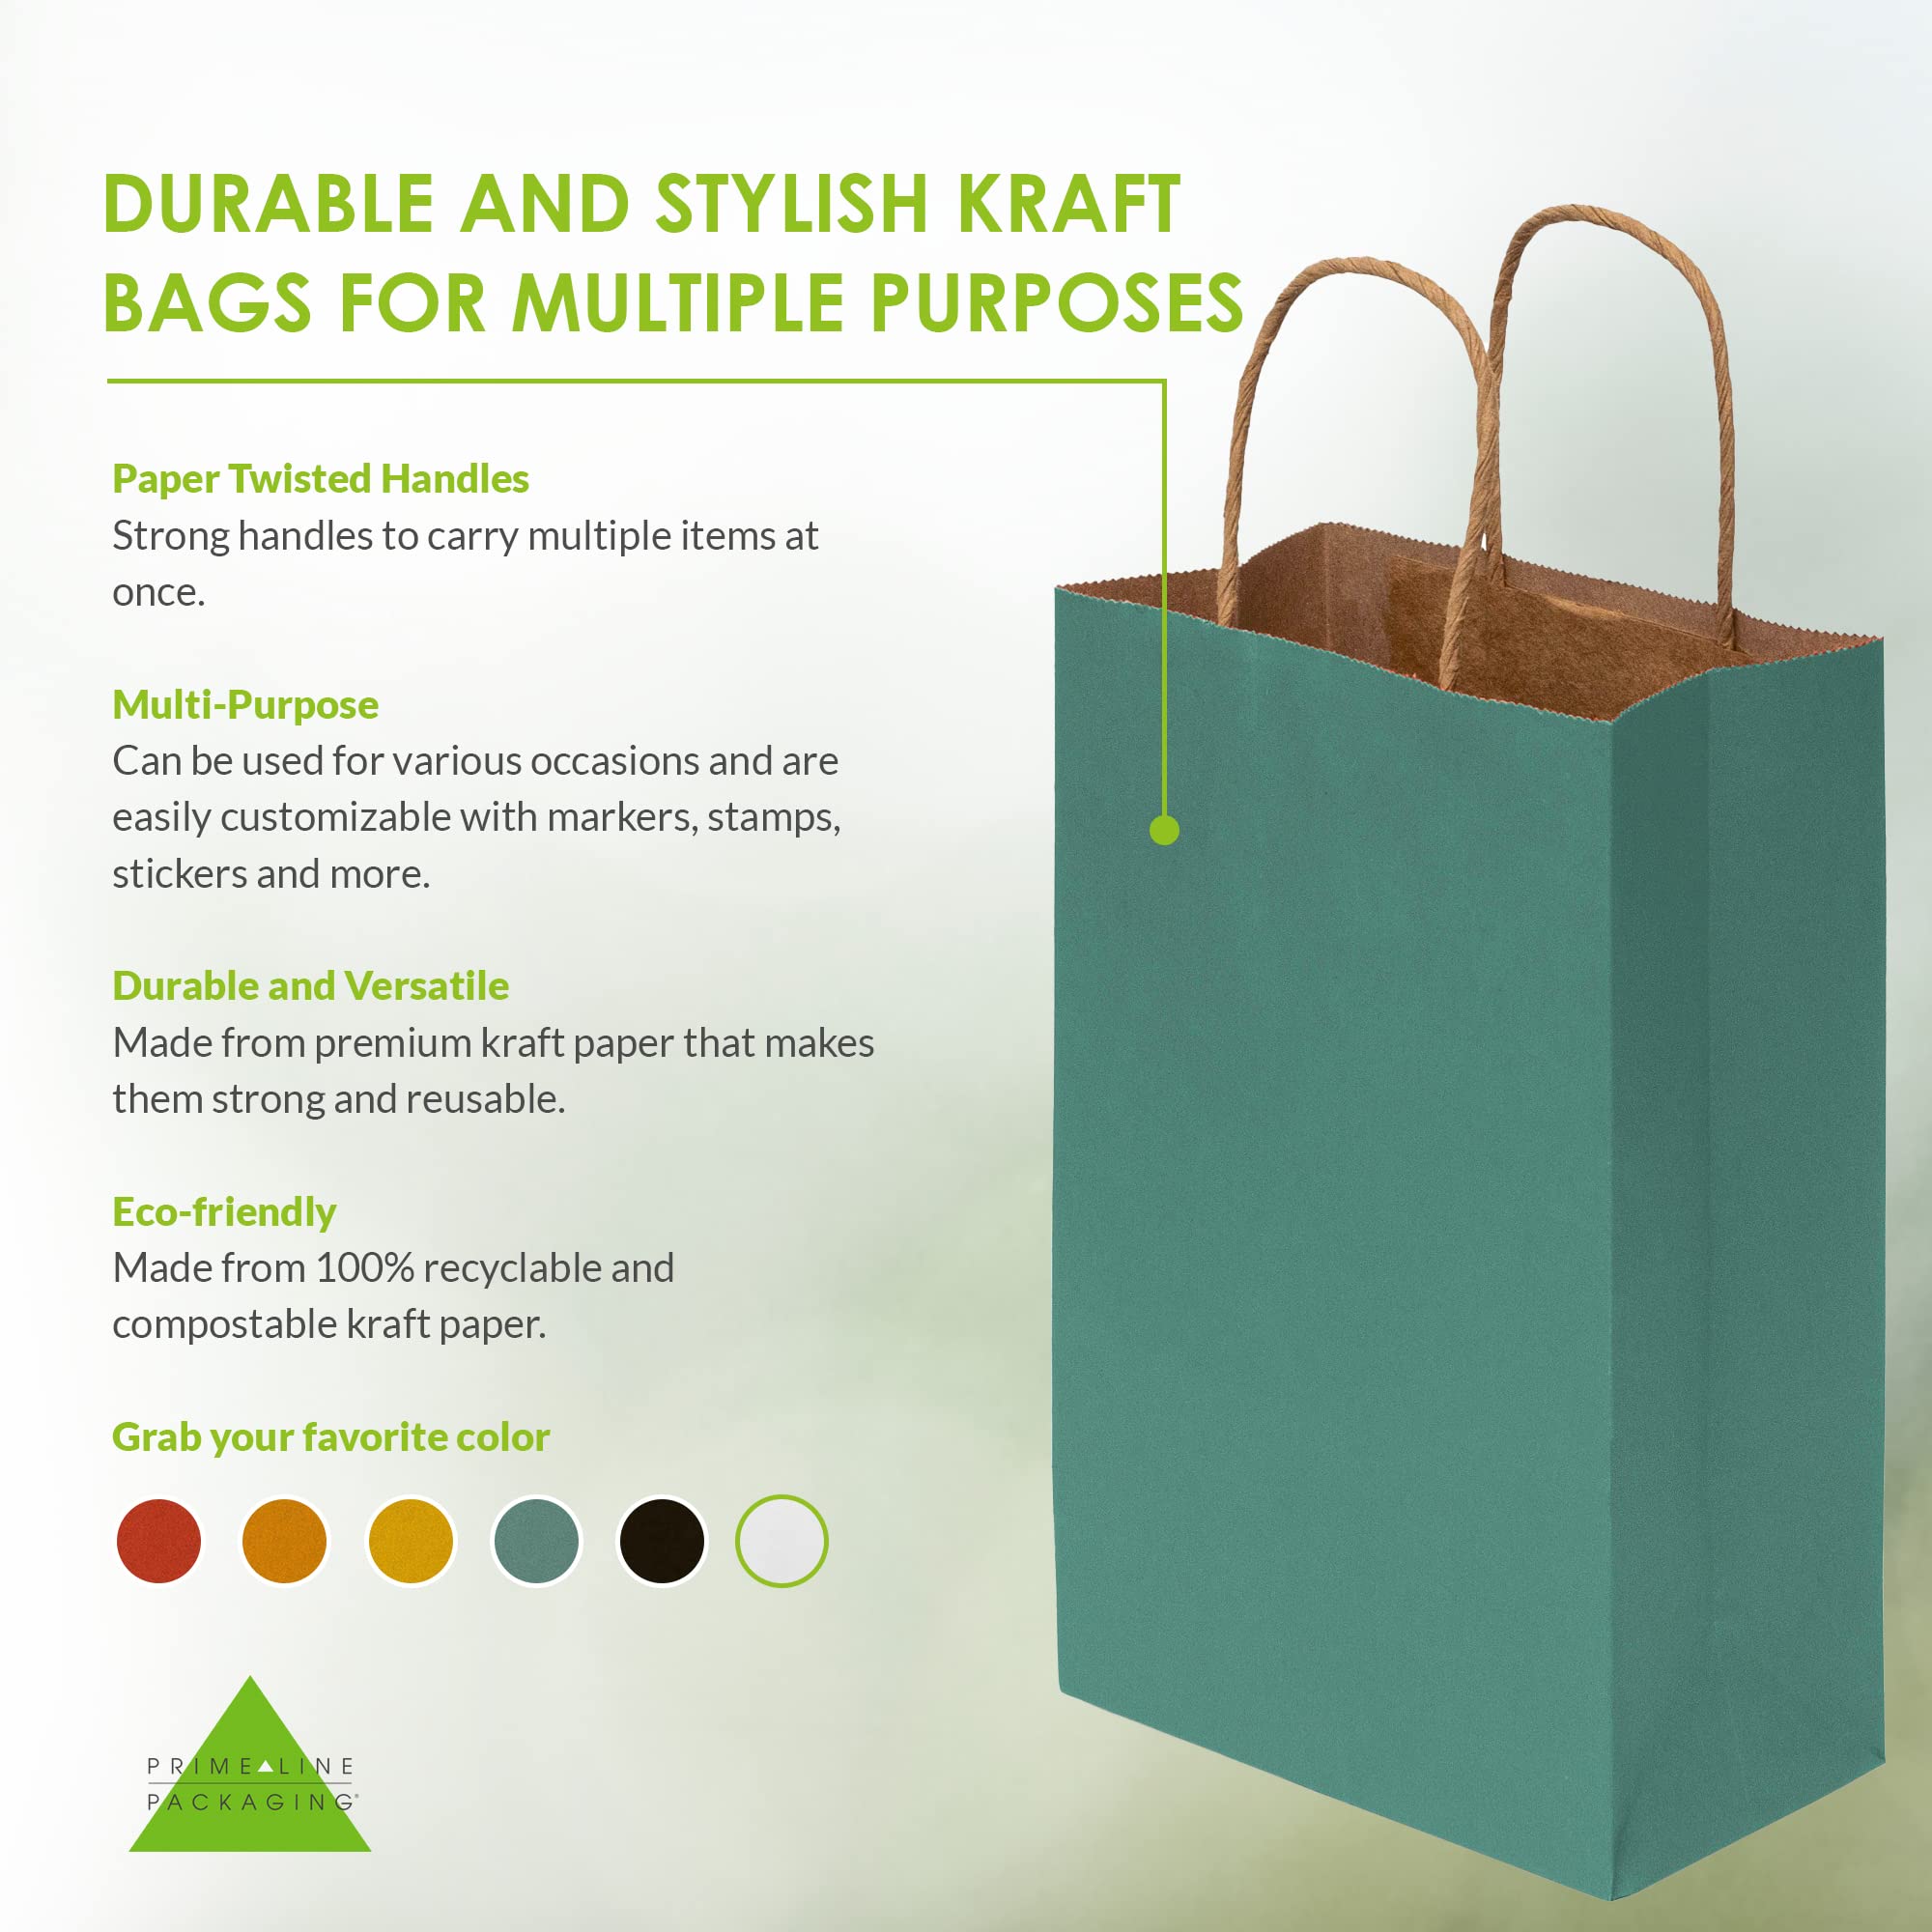 Green Gift Bags - 6x3x9 Inch 100 Pack Small Kraft Paper Shopping Bags with Handles, Craft Totes in Bulk for Boutiques, Small Business, Retail Stores, Birthday Parties, Jewelry, Merchandise, Bulk  - Acceptable